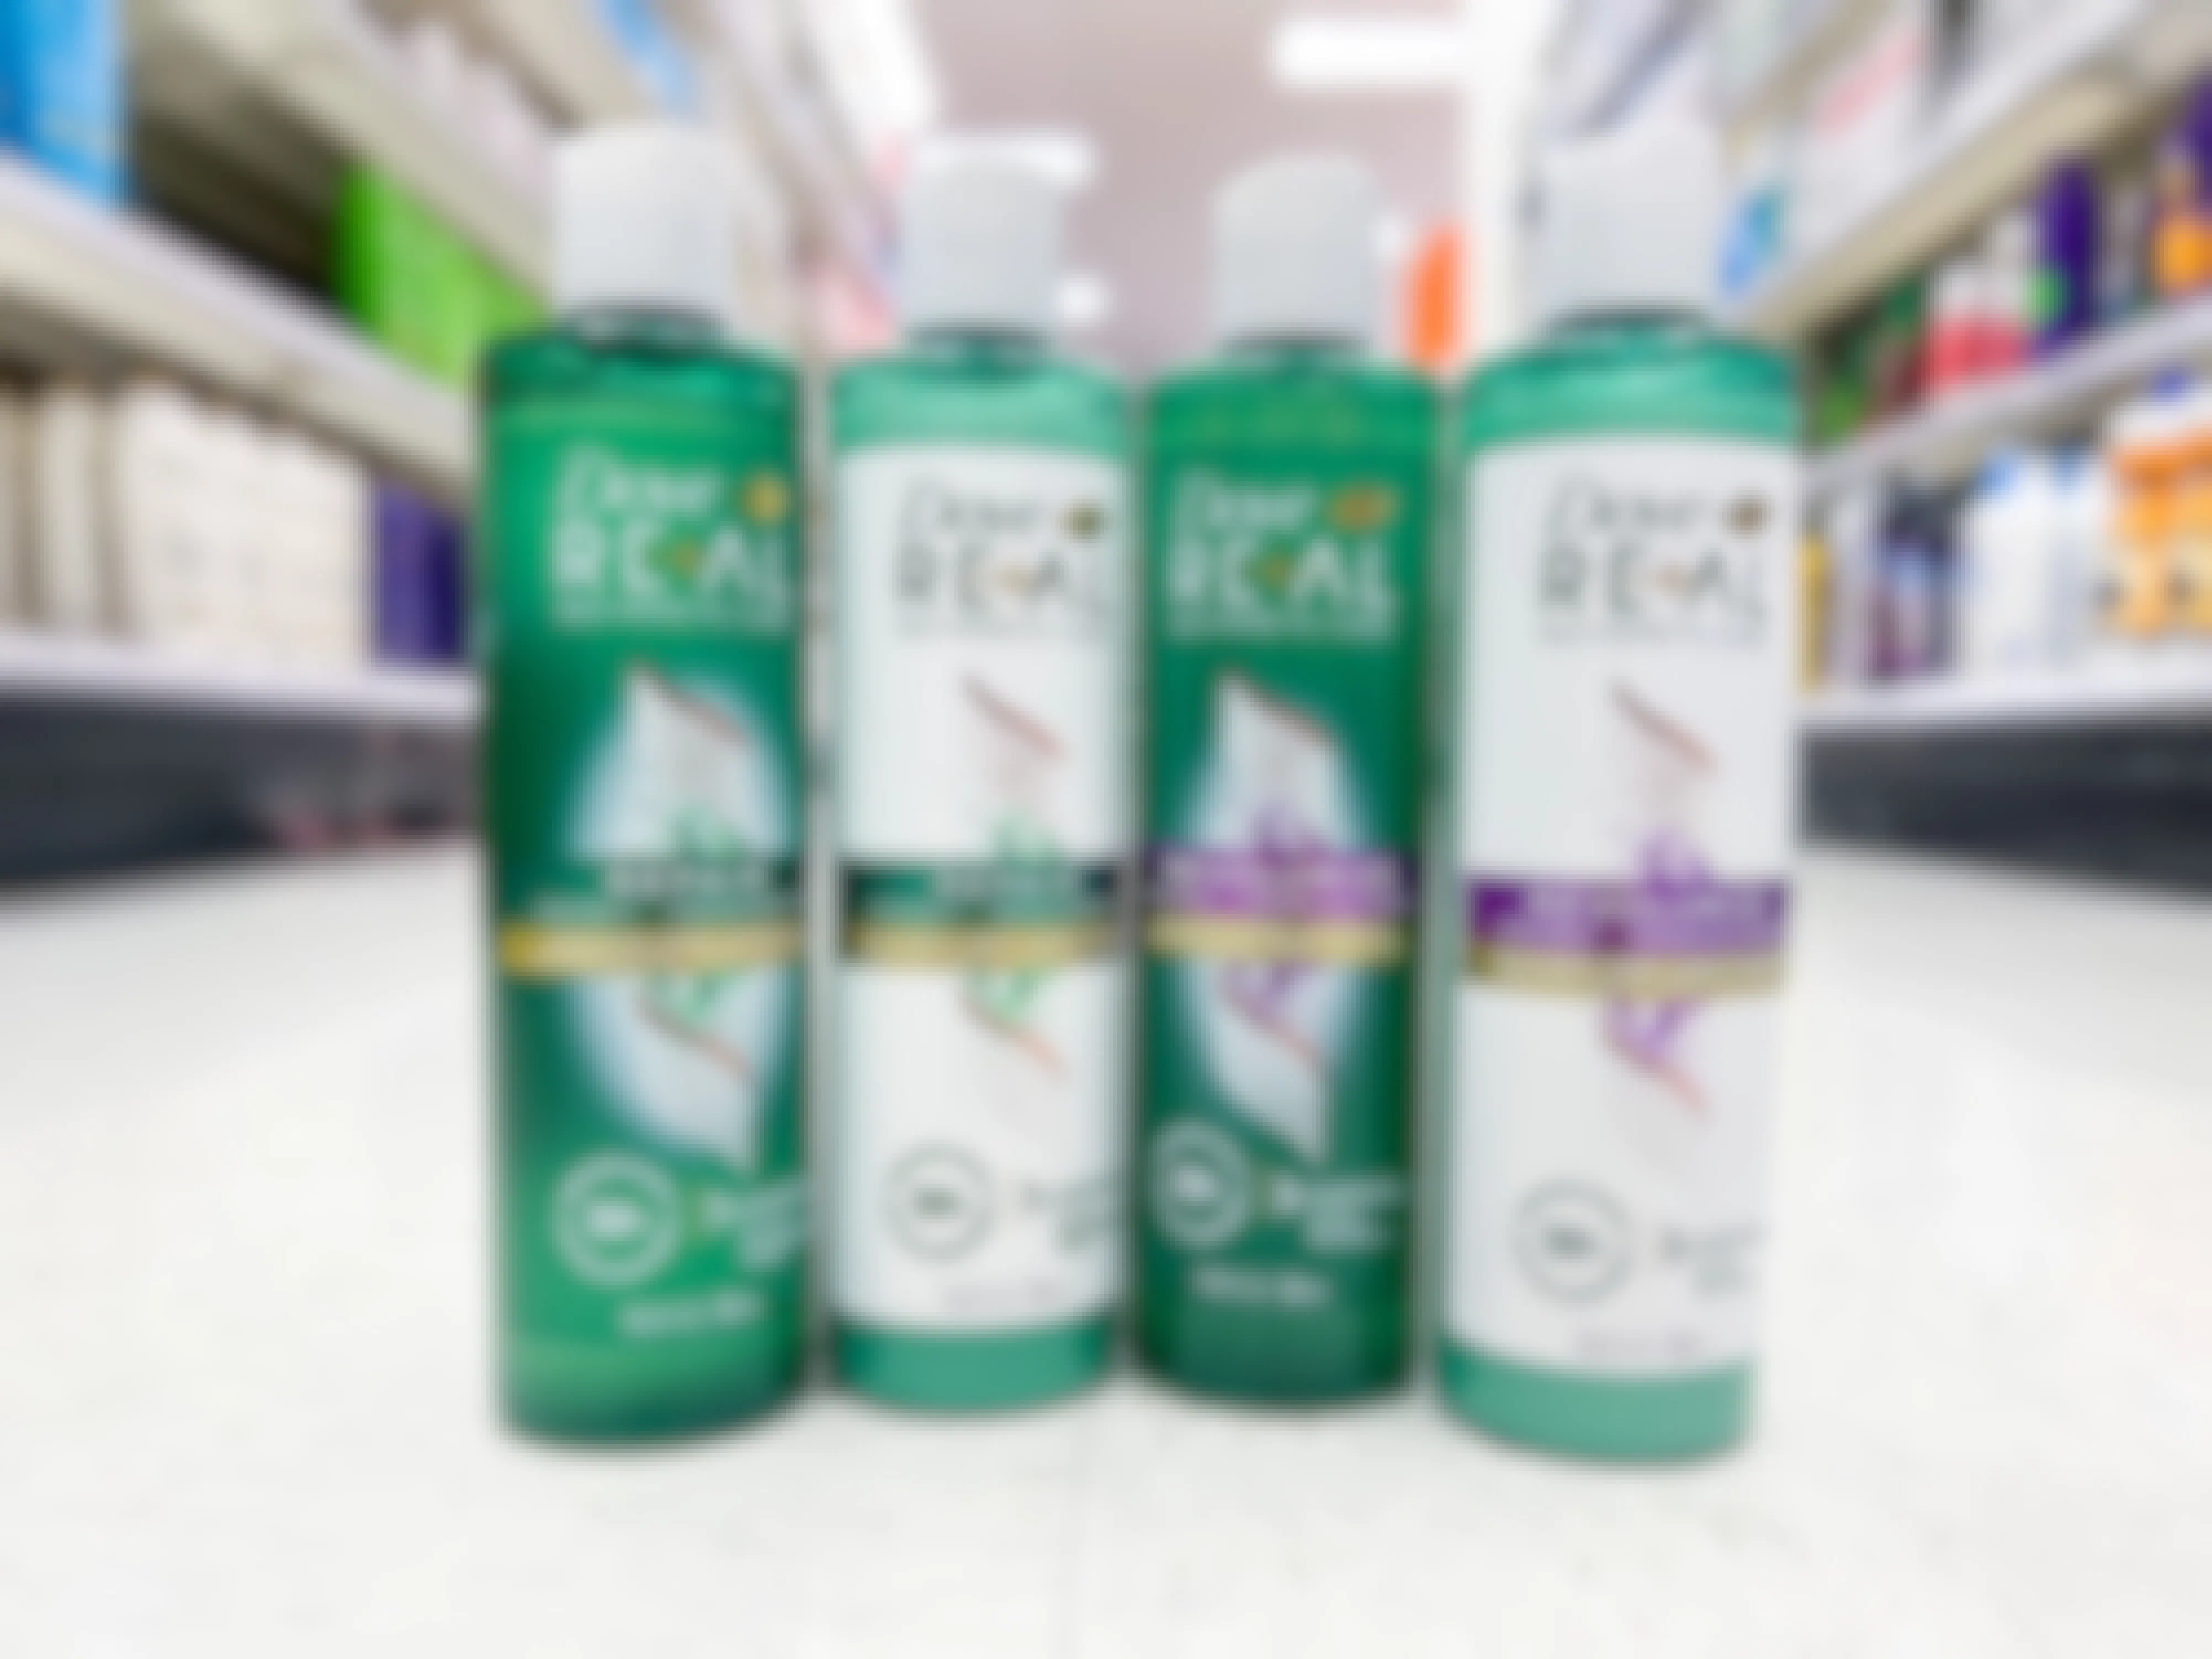 Save $ While Strengthening Hair with Dove's Vegan Keratin Hair Care